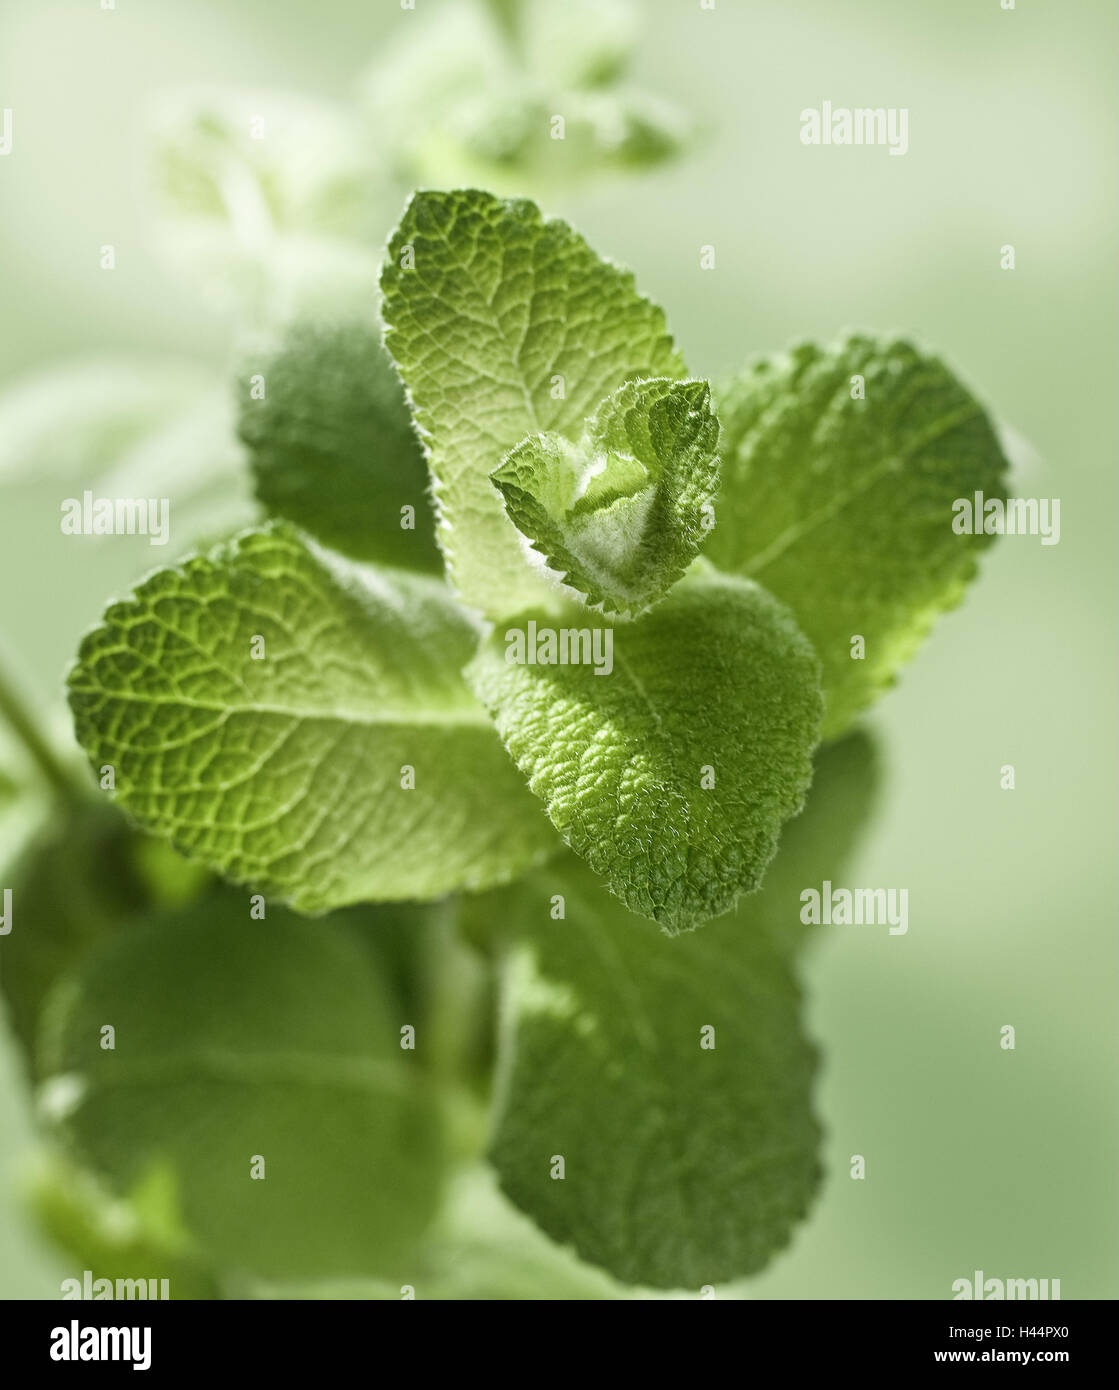 Apple mint, Mentha suaveolens, Lippenblütler, mint, spice, culinary spice, herbs, herbs, tea herbs, fragrantly, medicinal plants, spice plant, medicament plant, leaves, green, health, Stock Photo